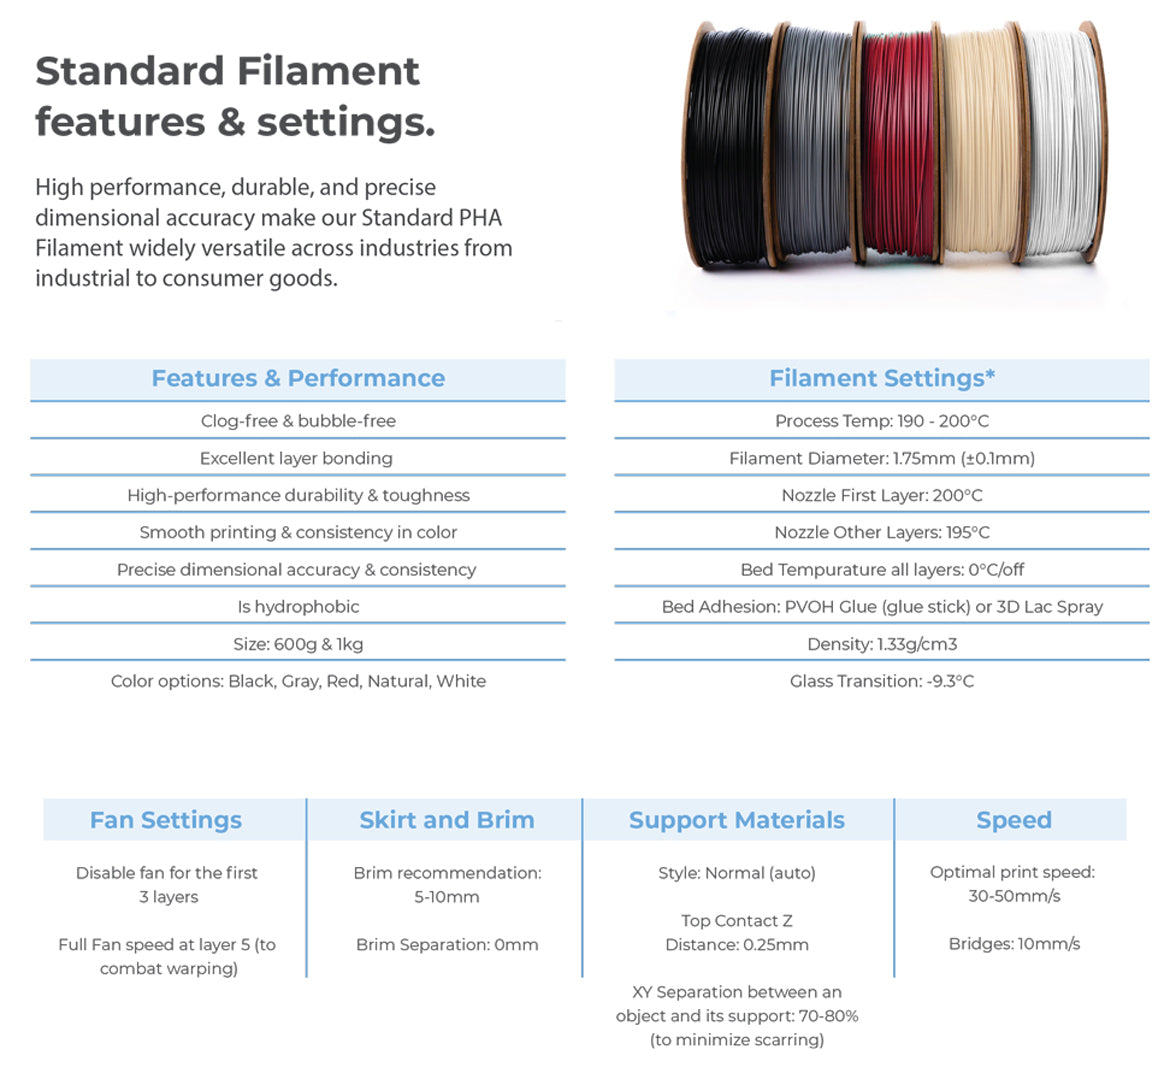 Standard Filament features and settings